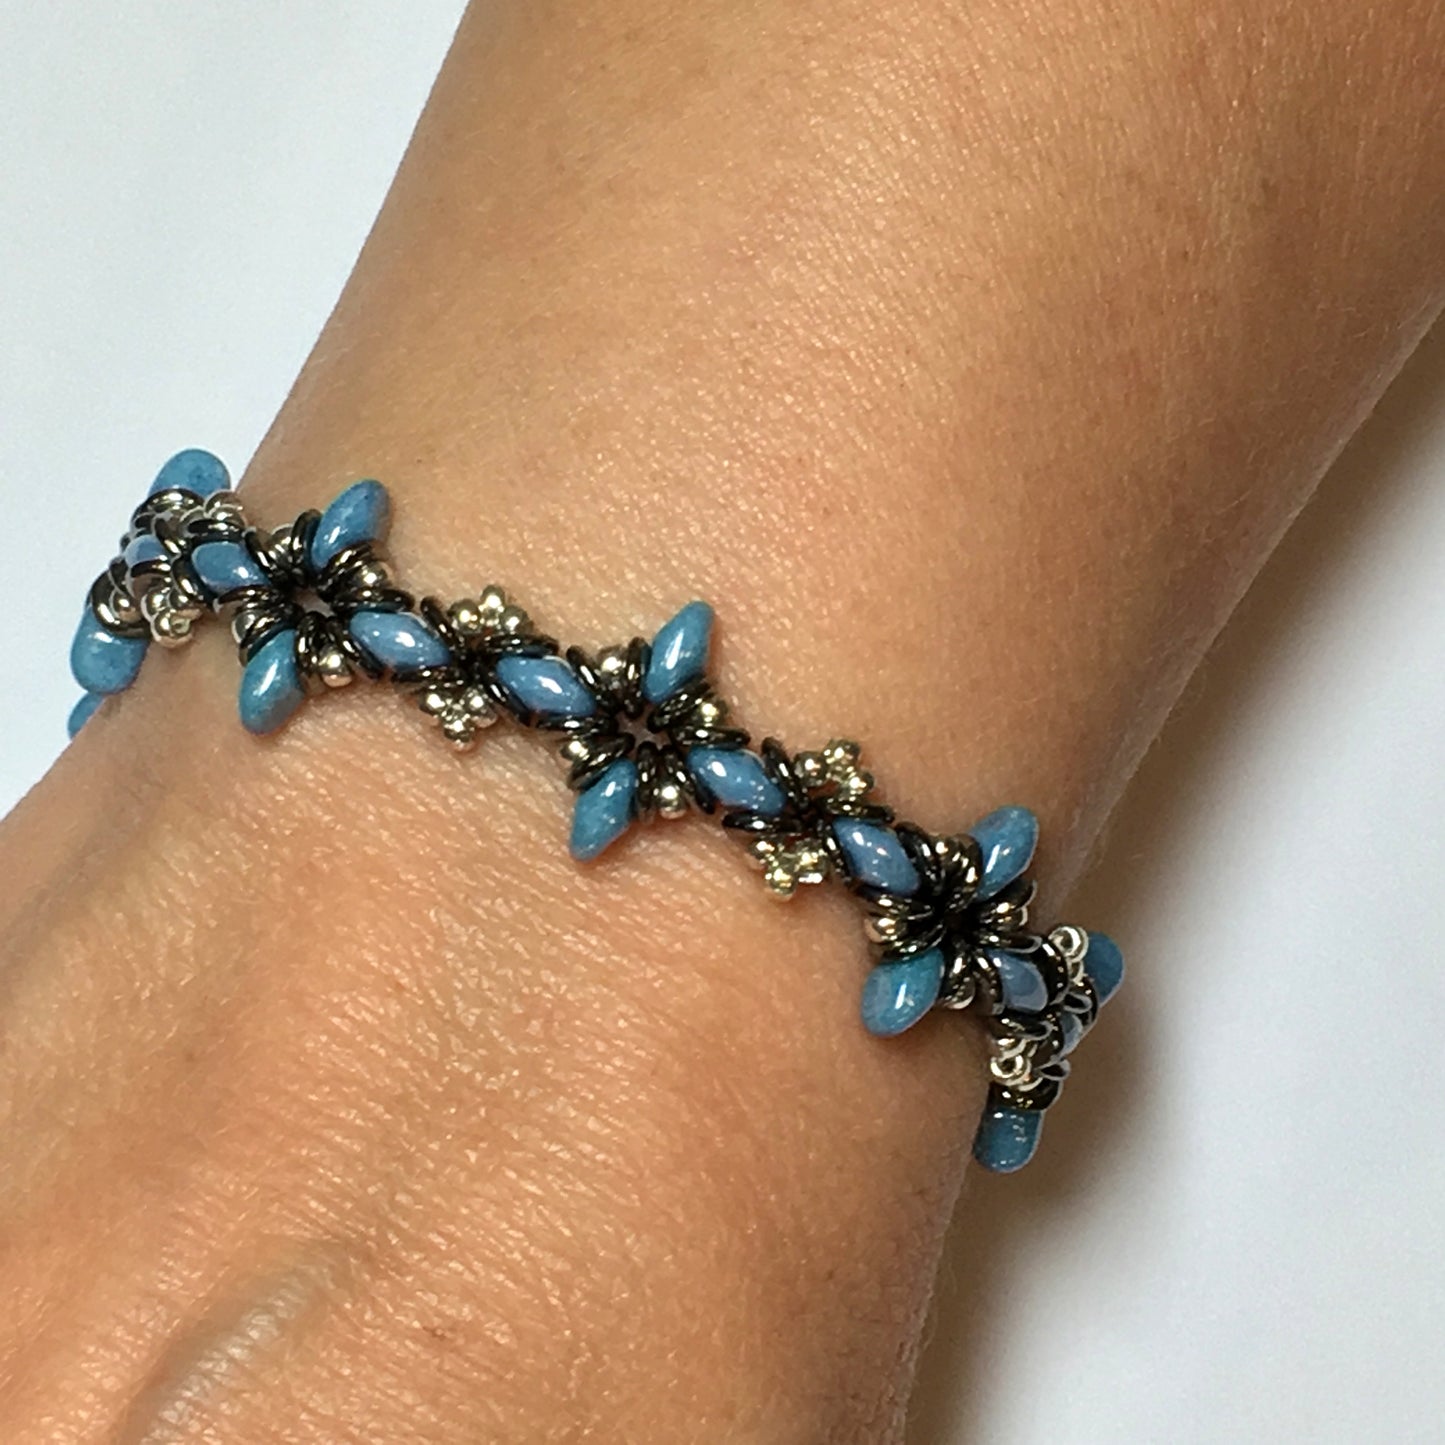 Bead Kit to Make "Oh, My Stars! Bracelet" Blue Luster/ Silver / Jet Full Chrome with Free Tutorial starting at $9.99